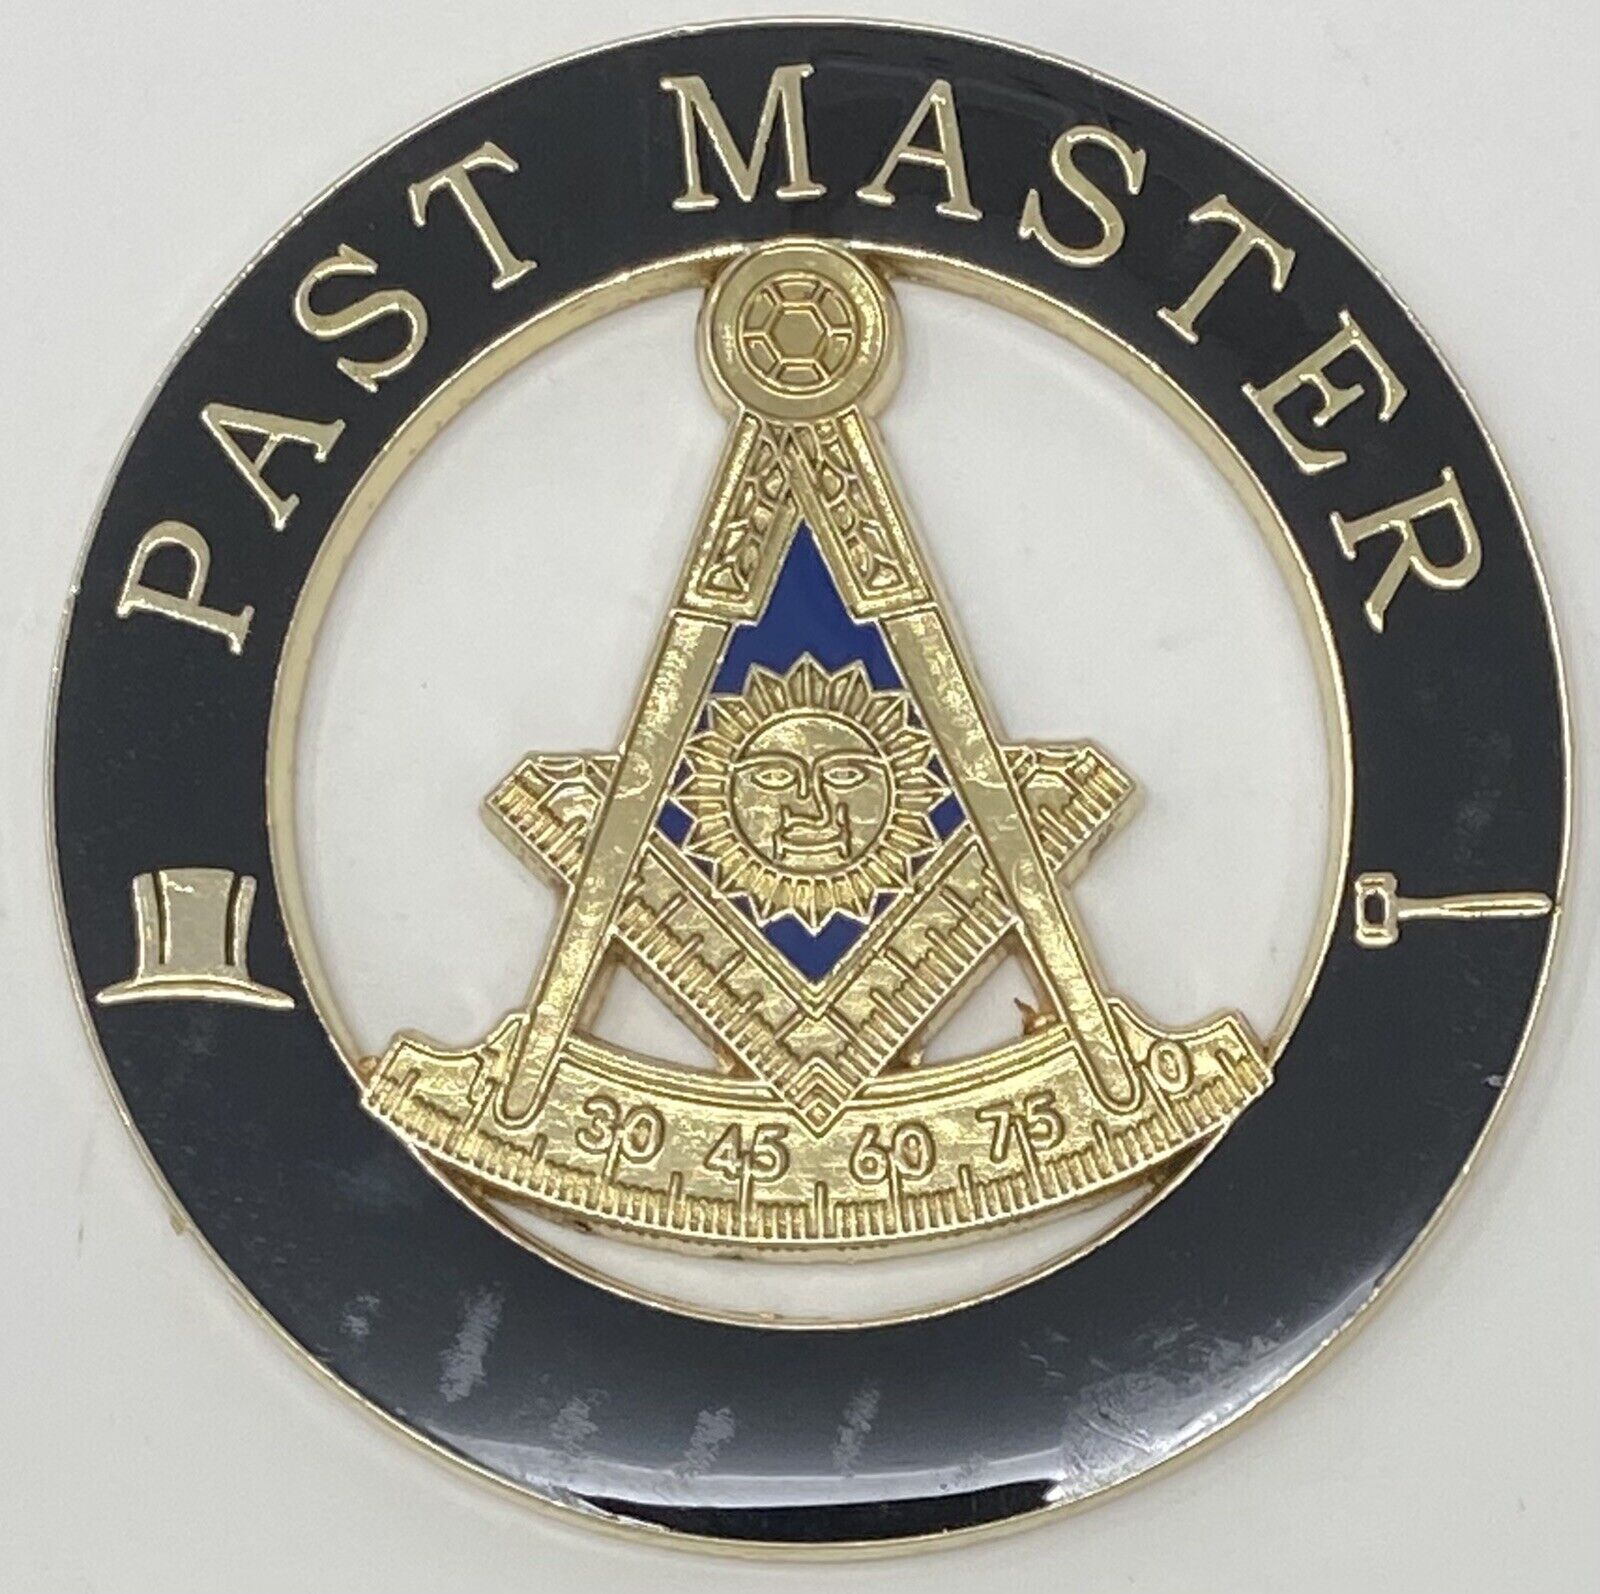 New Freemason Past Master Cut-Out Car Emblem with Square in Black